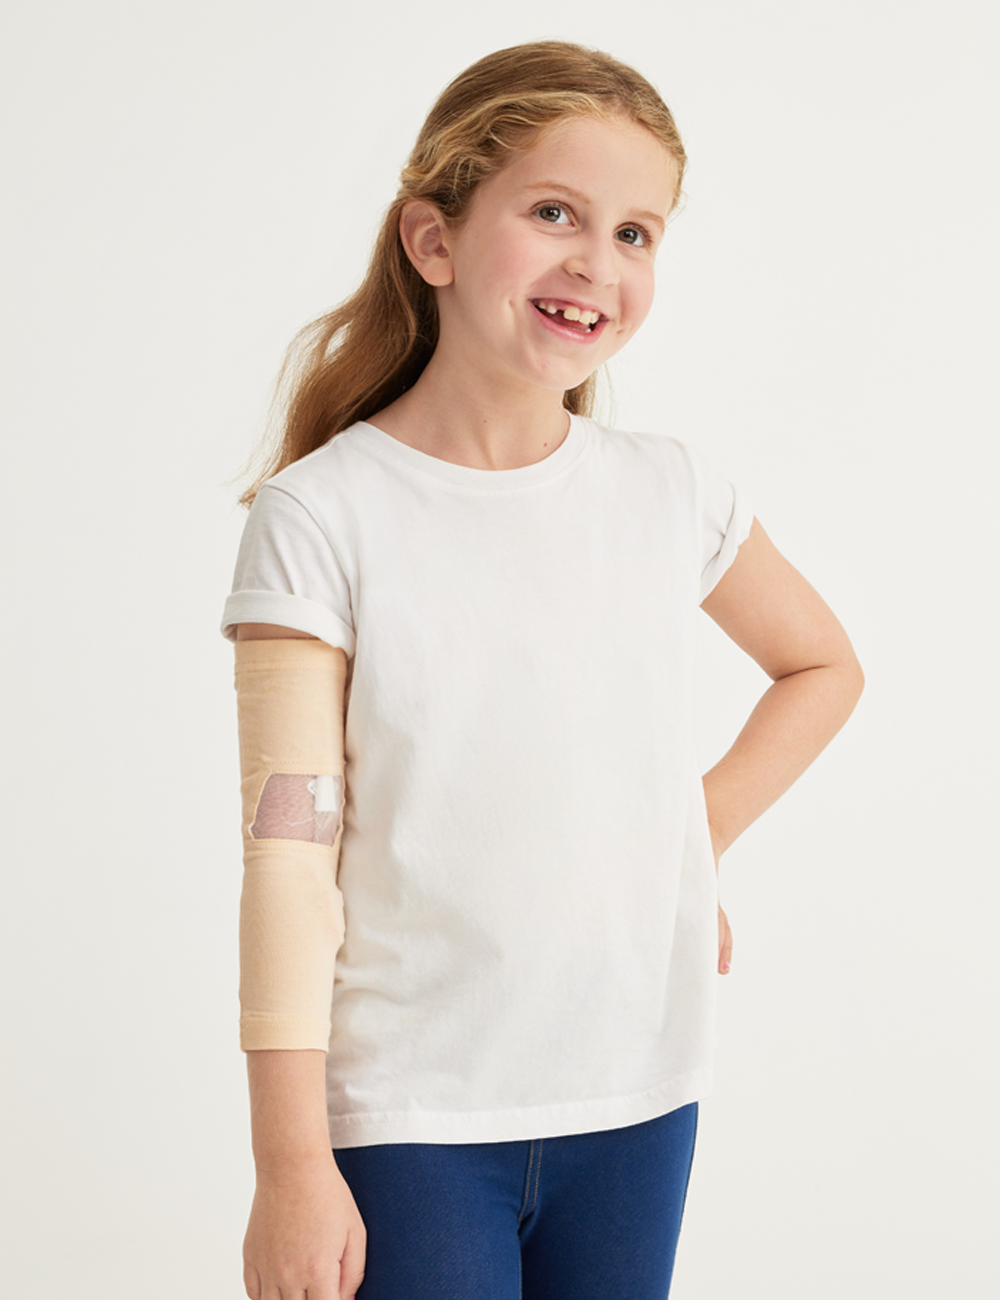 Kid&#39;s Ultra Grip PICC Line Cover